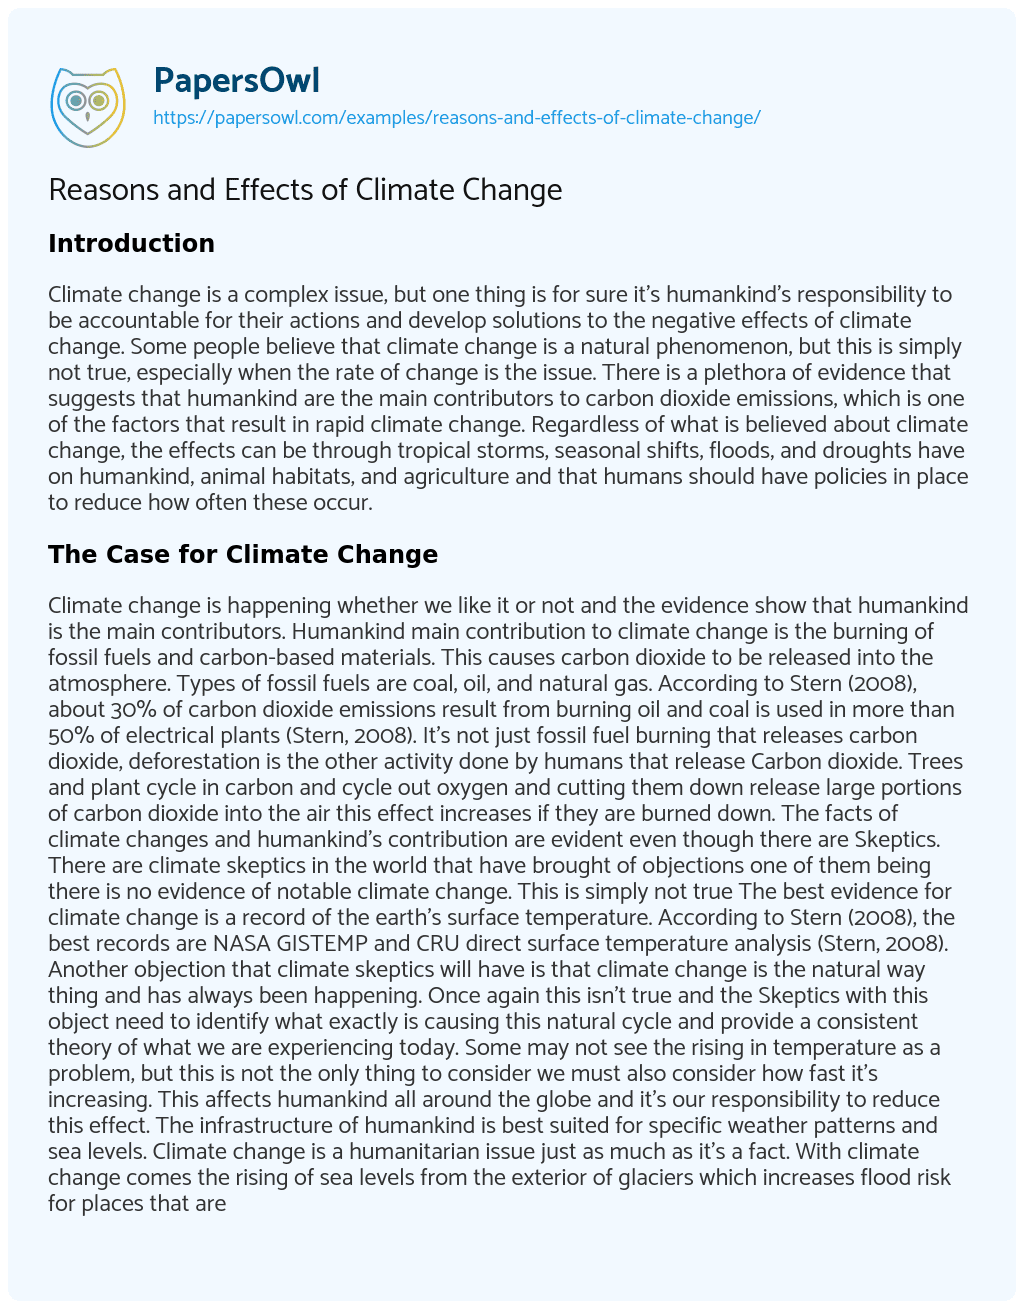 Reasons and Effects of Climate Change essay